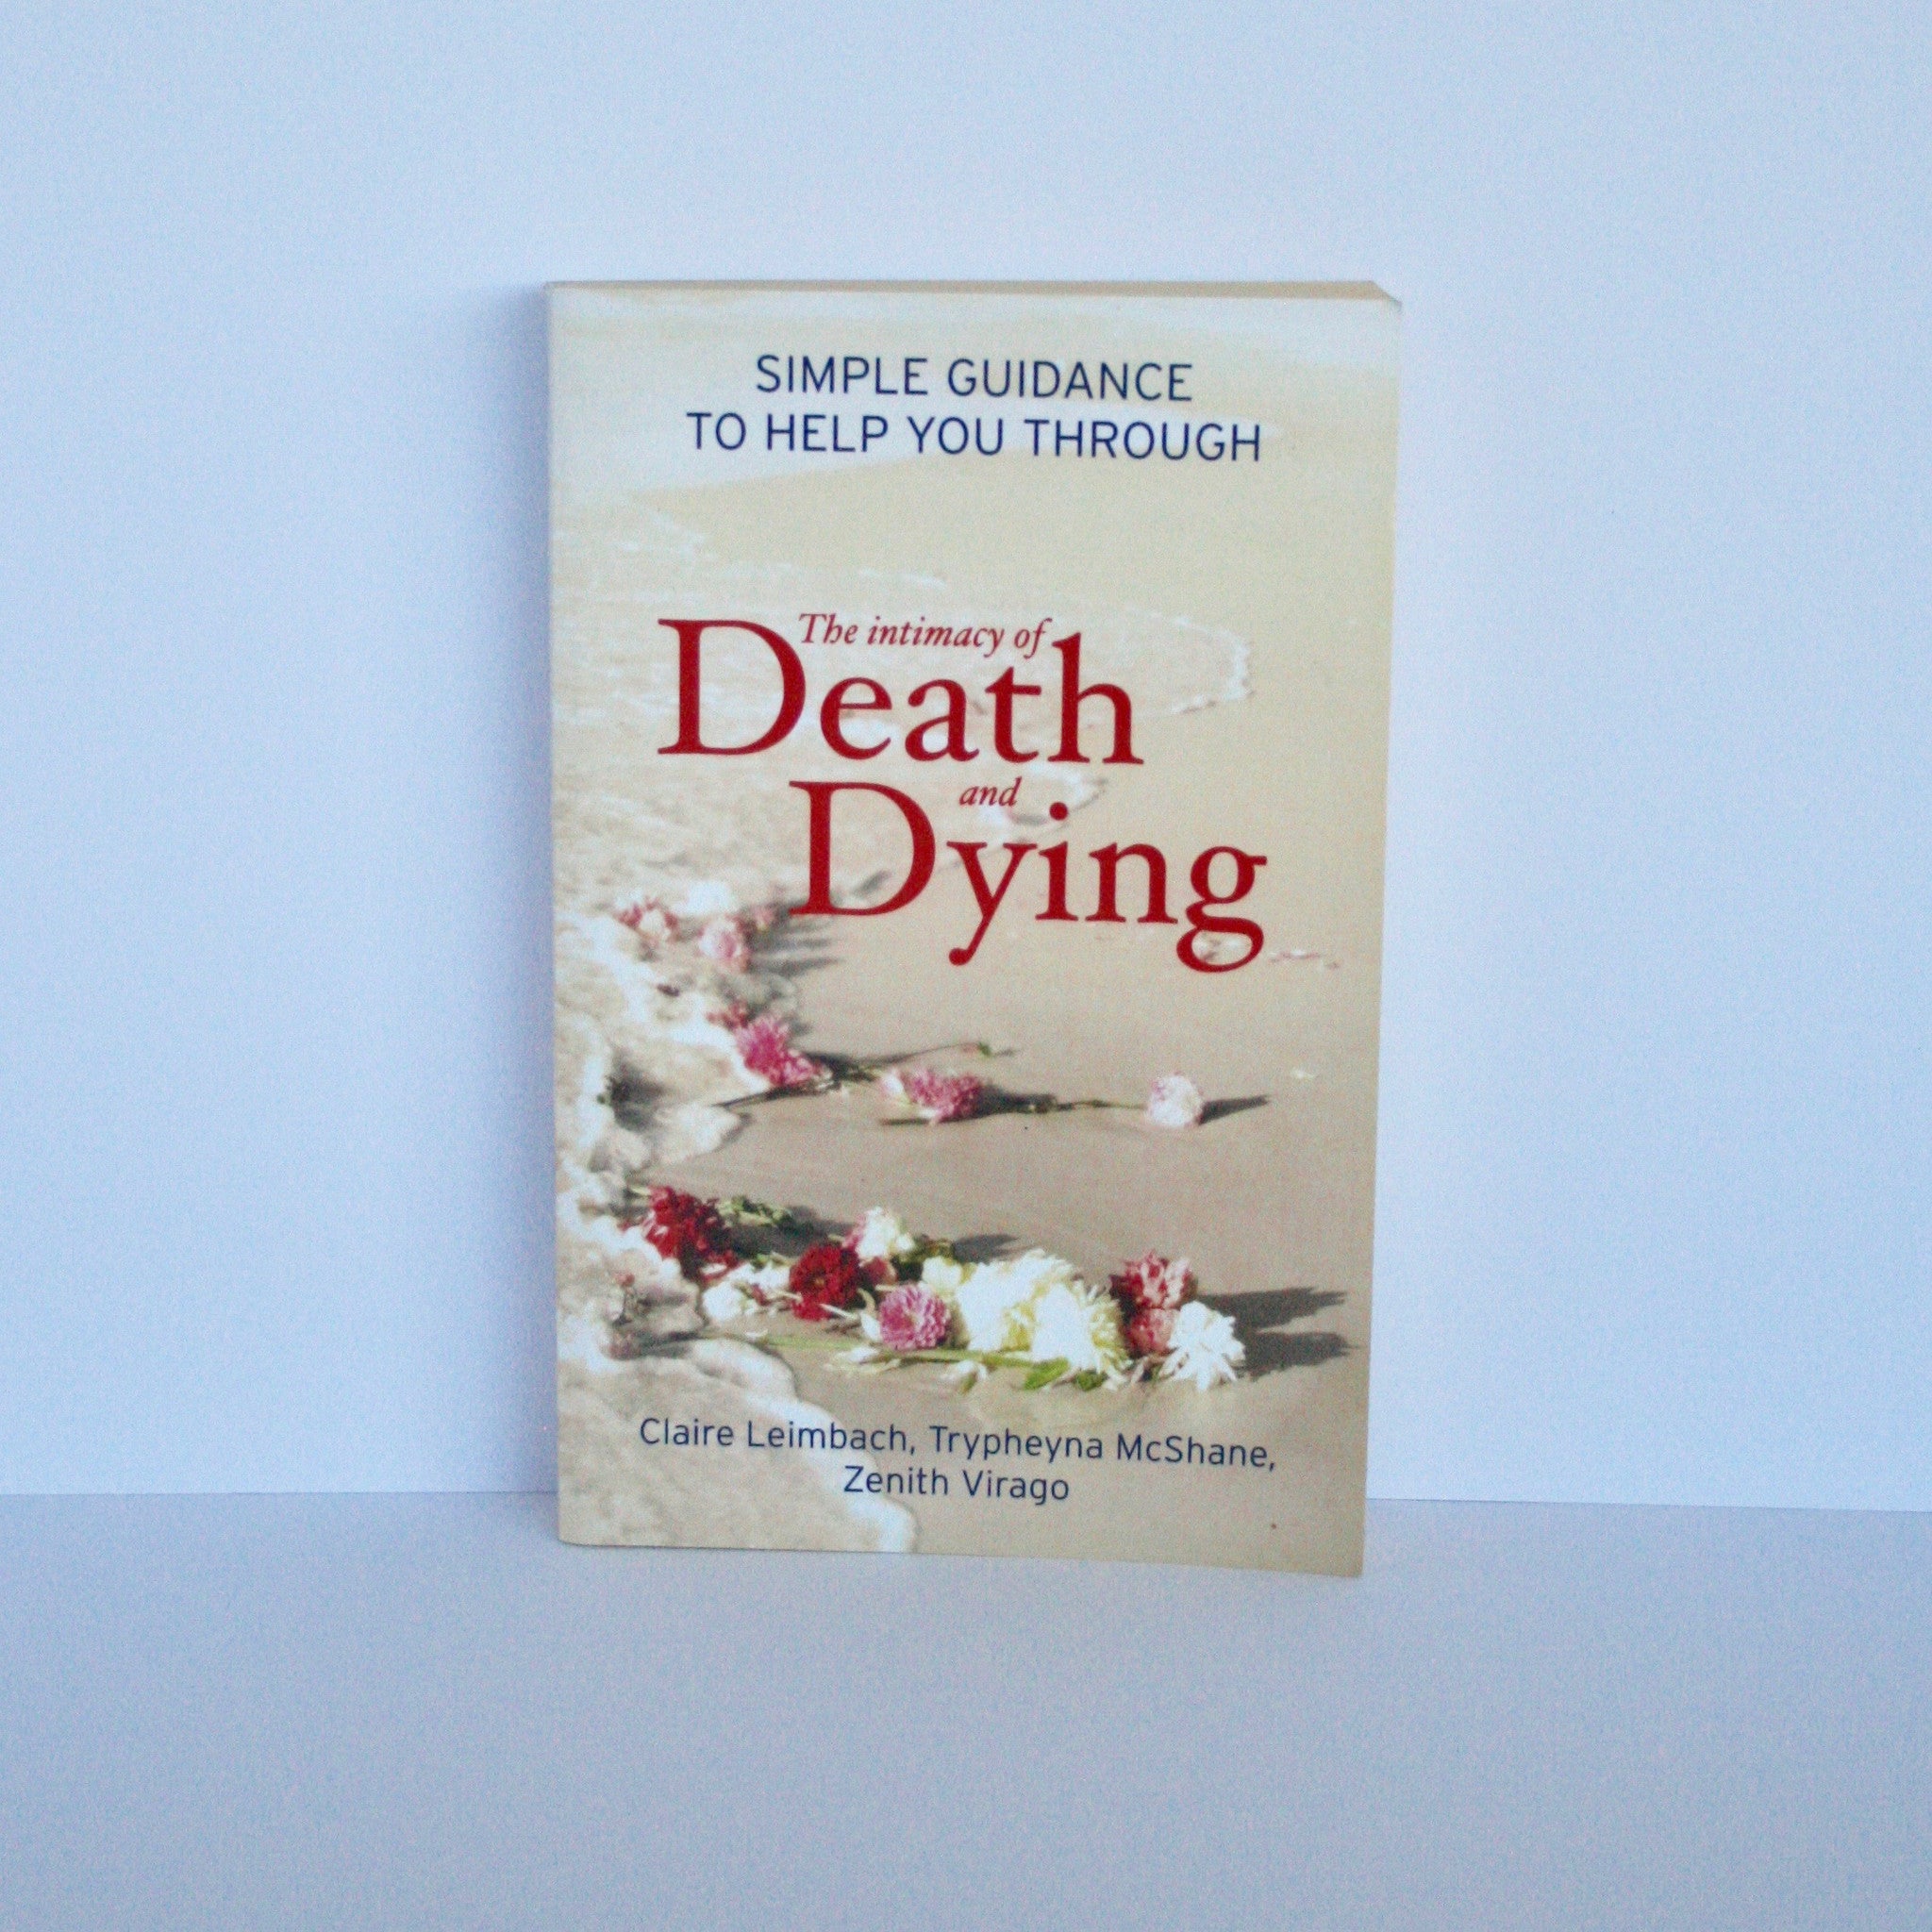 Intimacy of Death and Dying by Claire Leimbach, Trypheyna McShane, Zenith  Virago